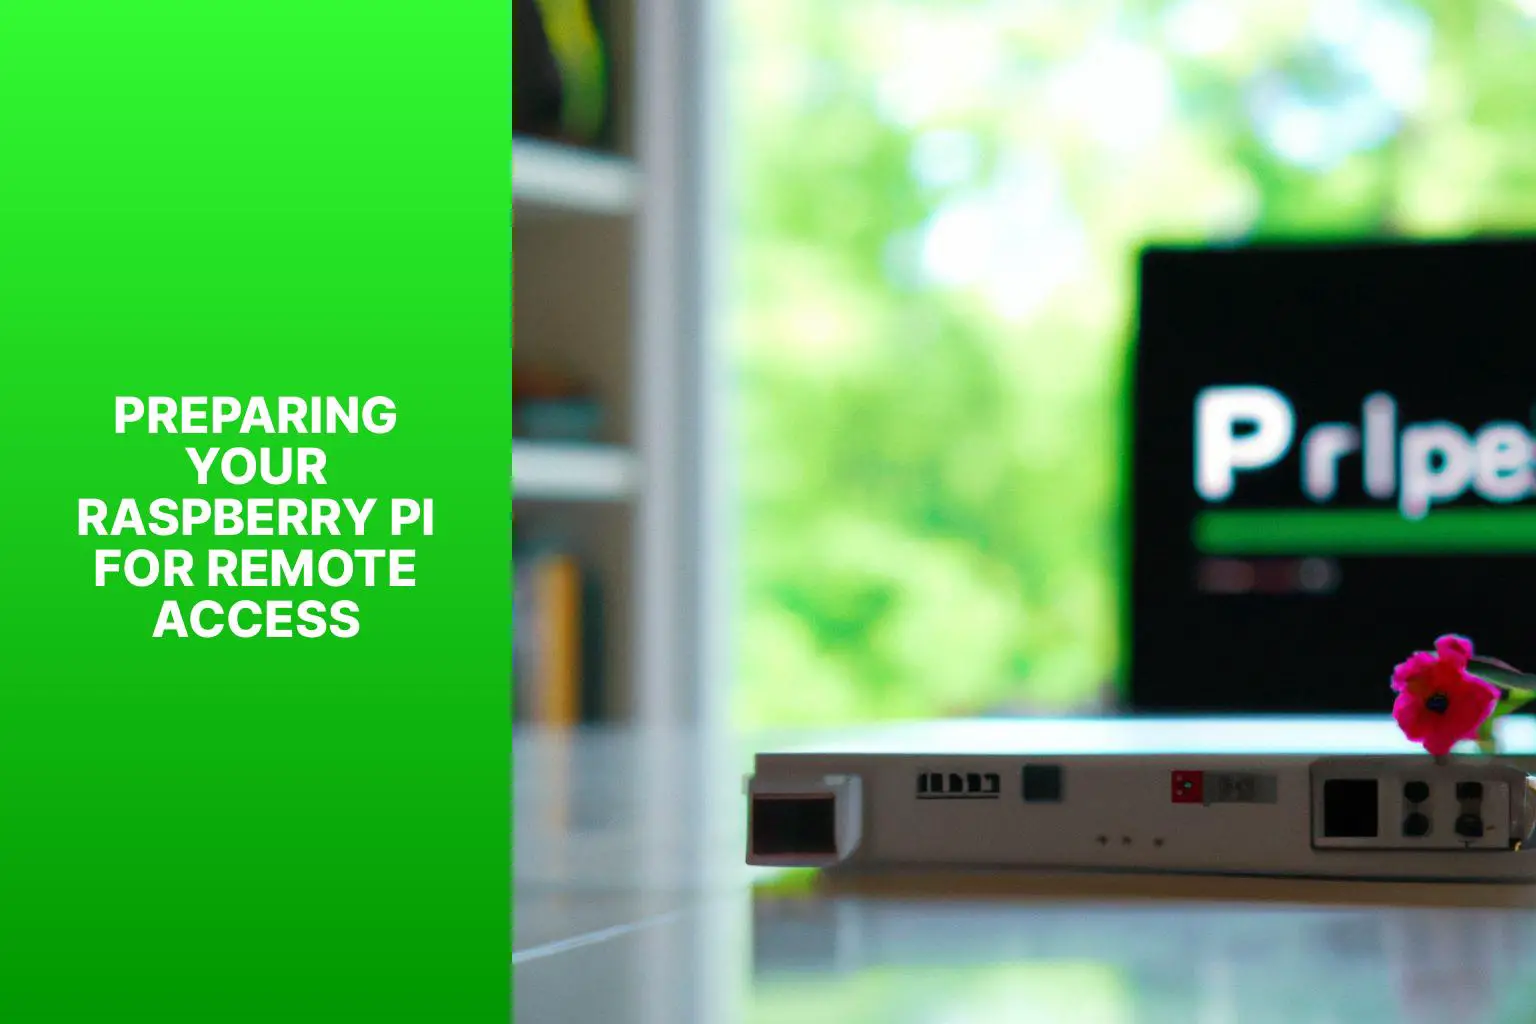 Preparing Your Raspberry Pi for Remote Access - how to connect to raspberry pi from outside network 